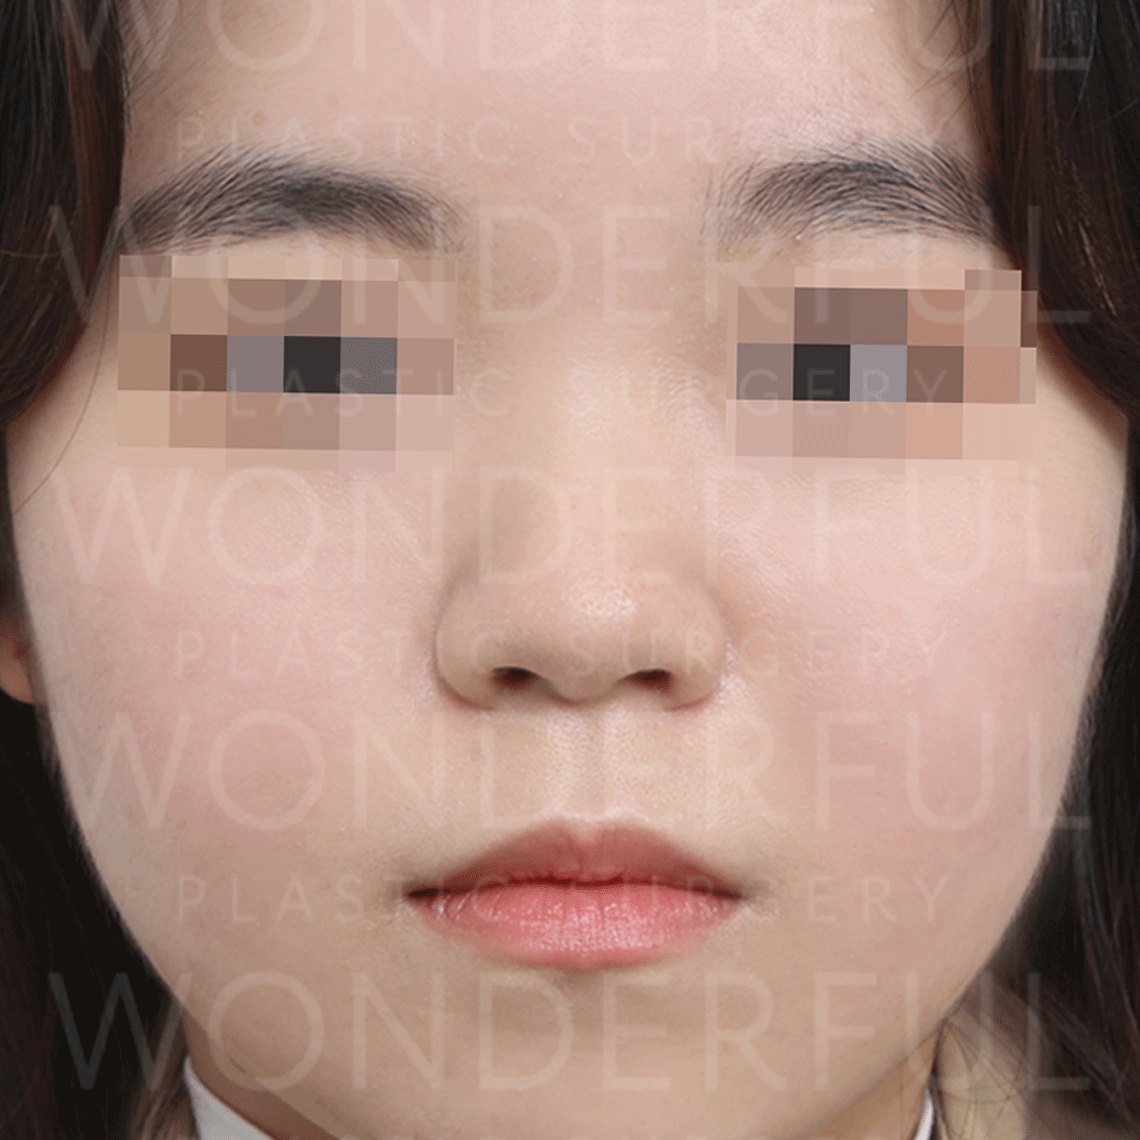 wonderful-plastic-surgery-hospital-korea-nose-rhinoplasty-before-after-results-before-1